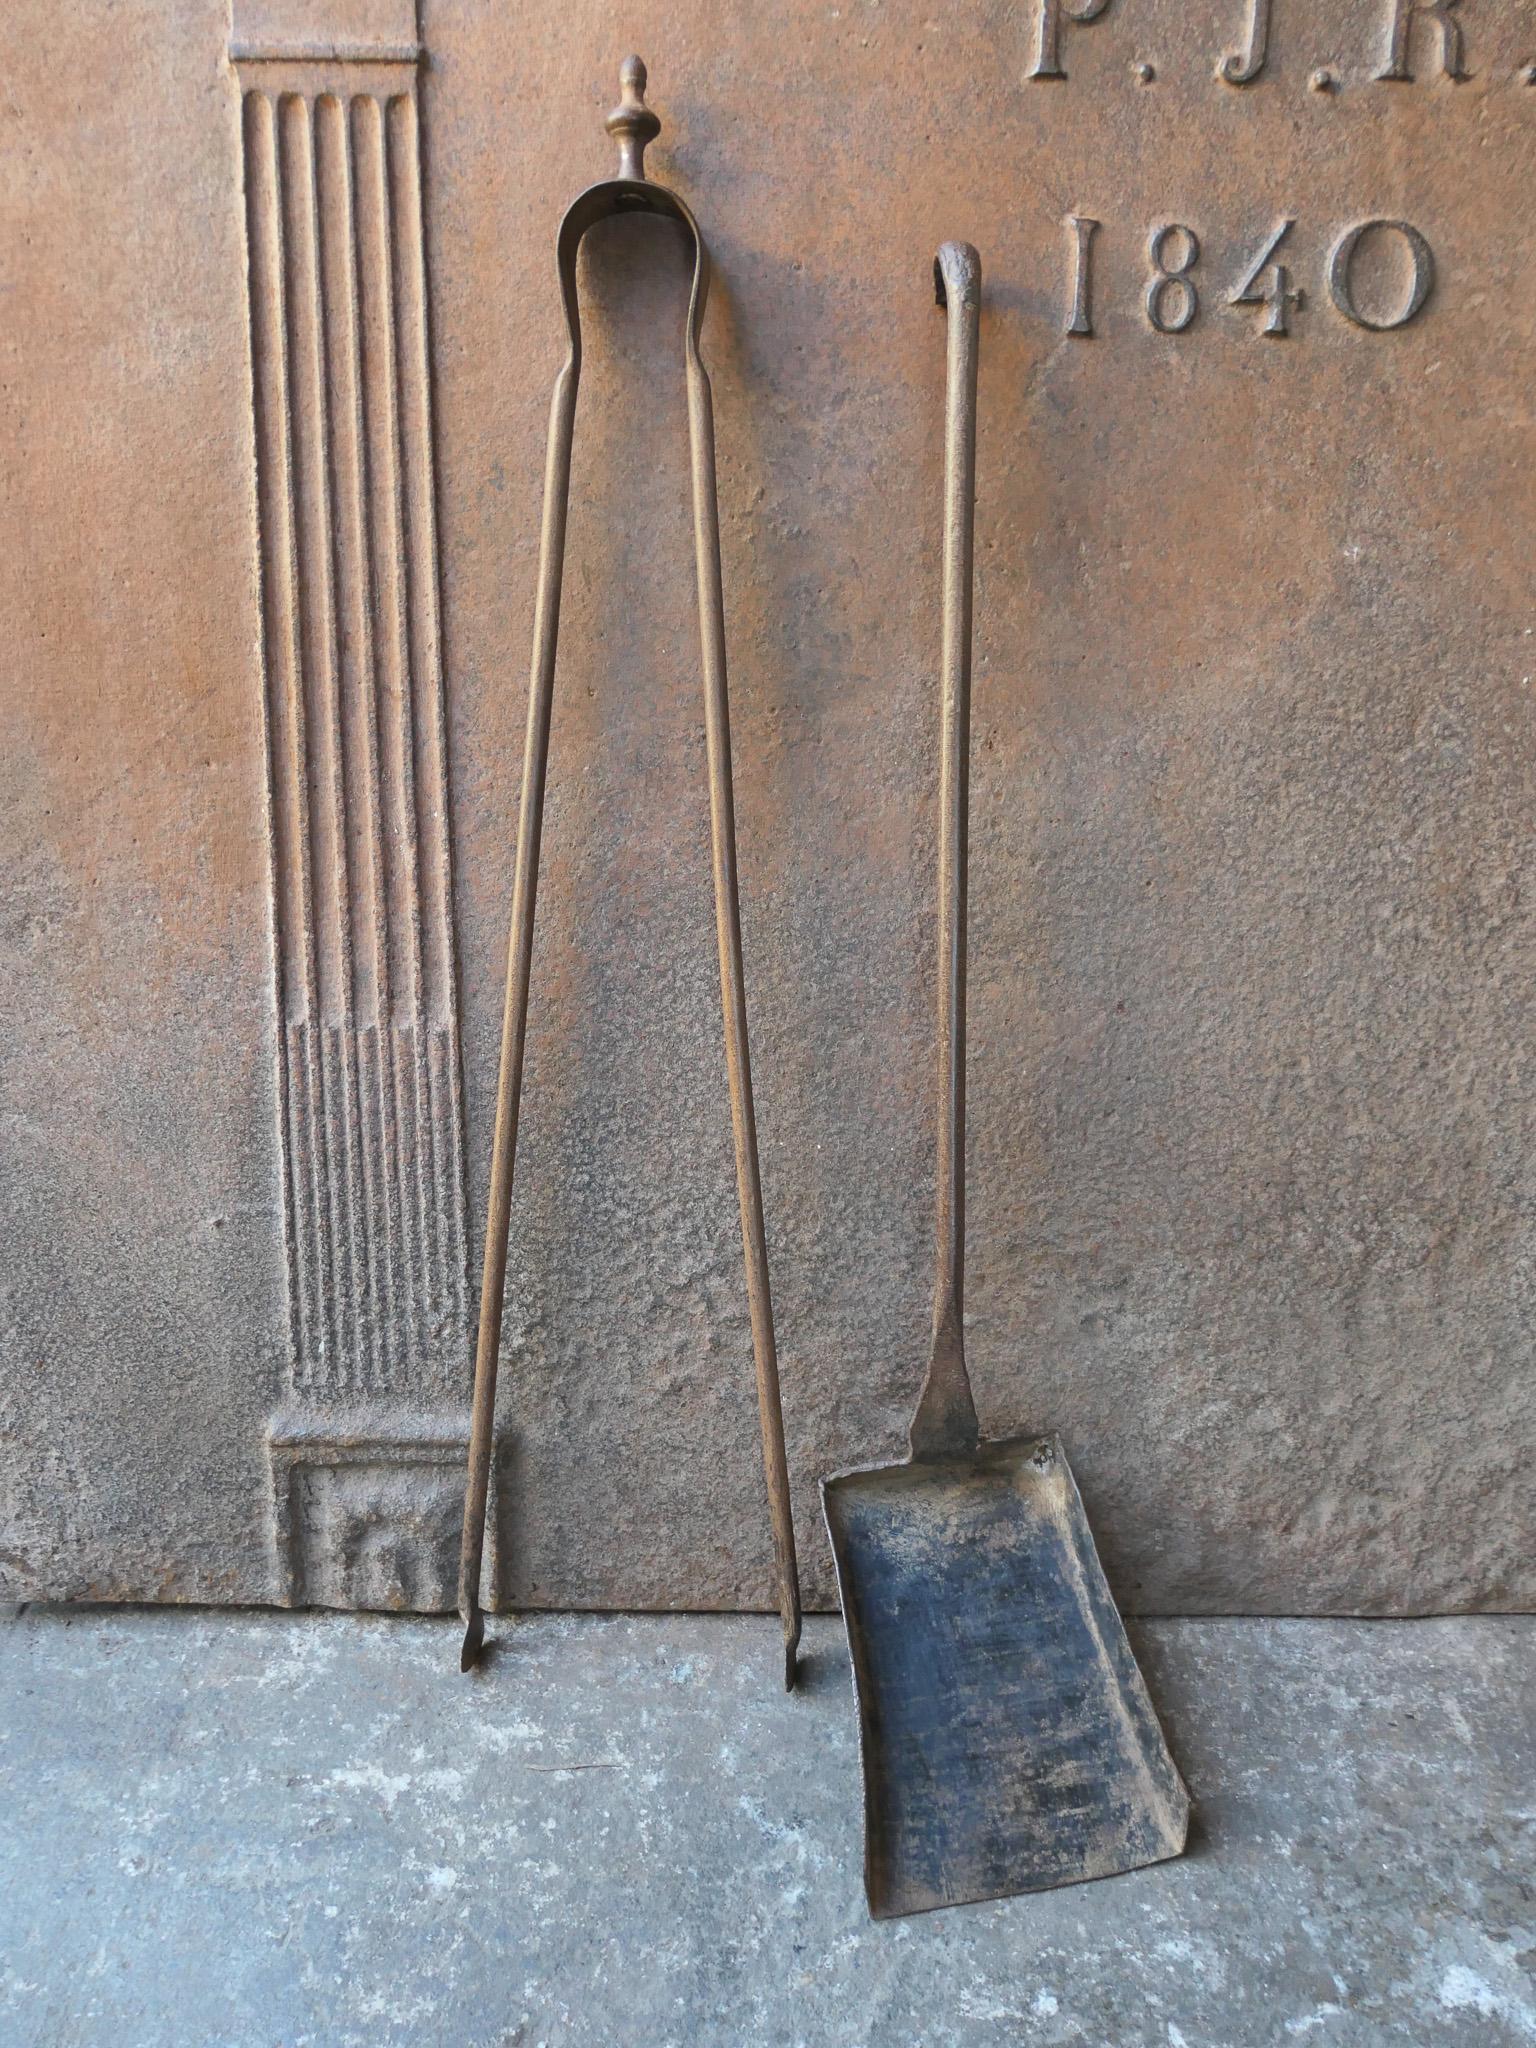 Rustic 18th-19th century French fireplace tool set. The tool set consists of fireplace tongs and a shovel. The tools are made of wrought iron. The set is in a good condition and fit for use in the fireplace.